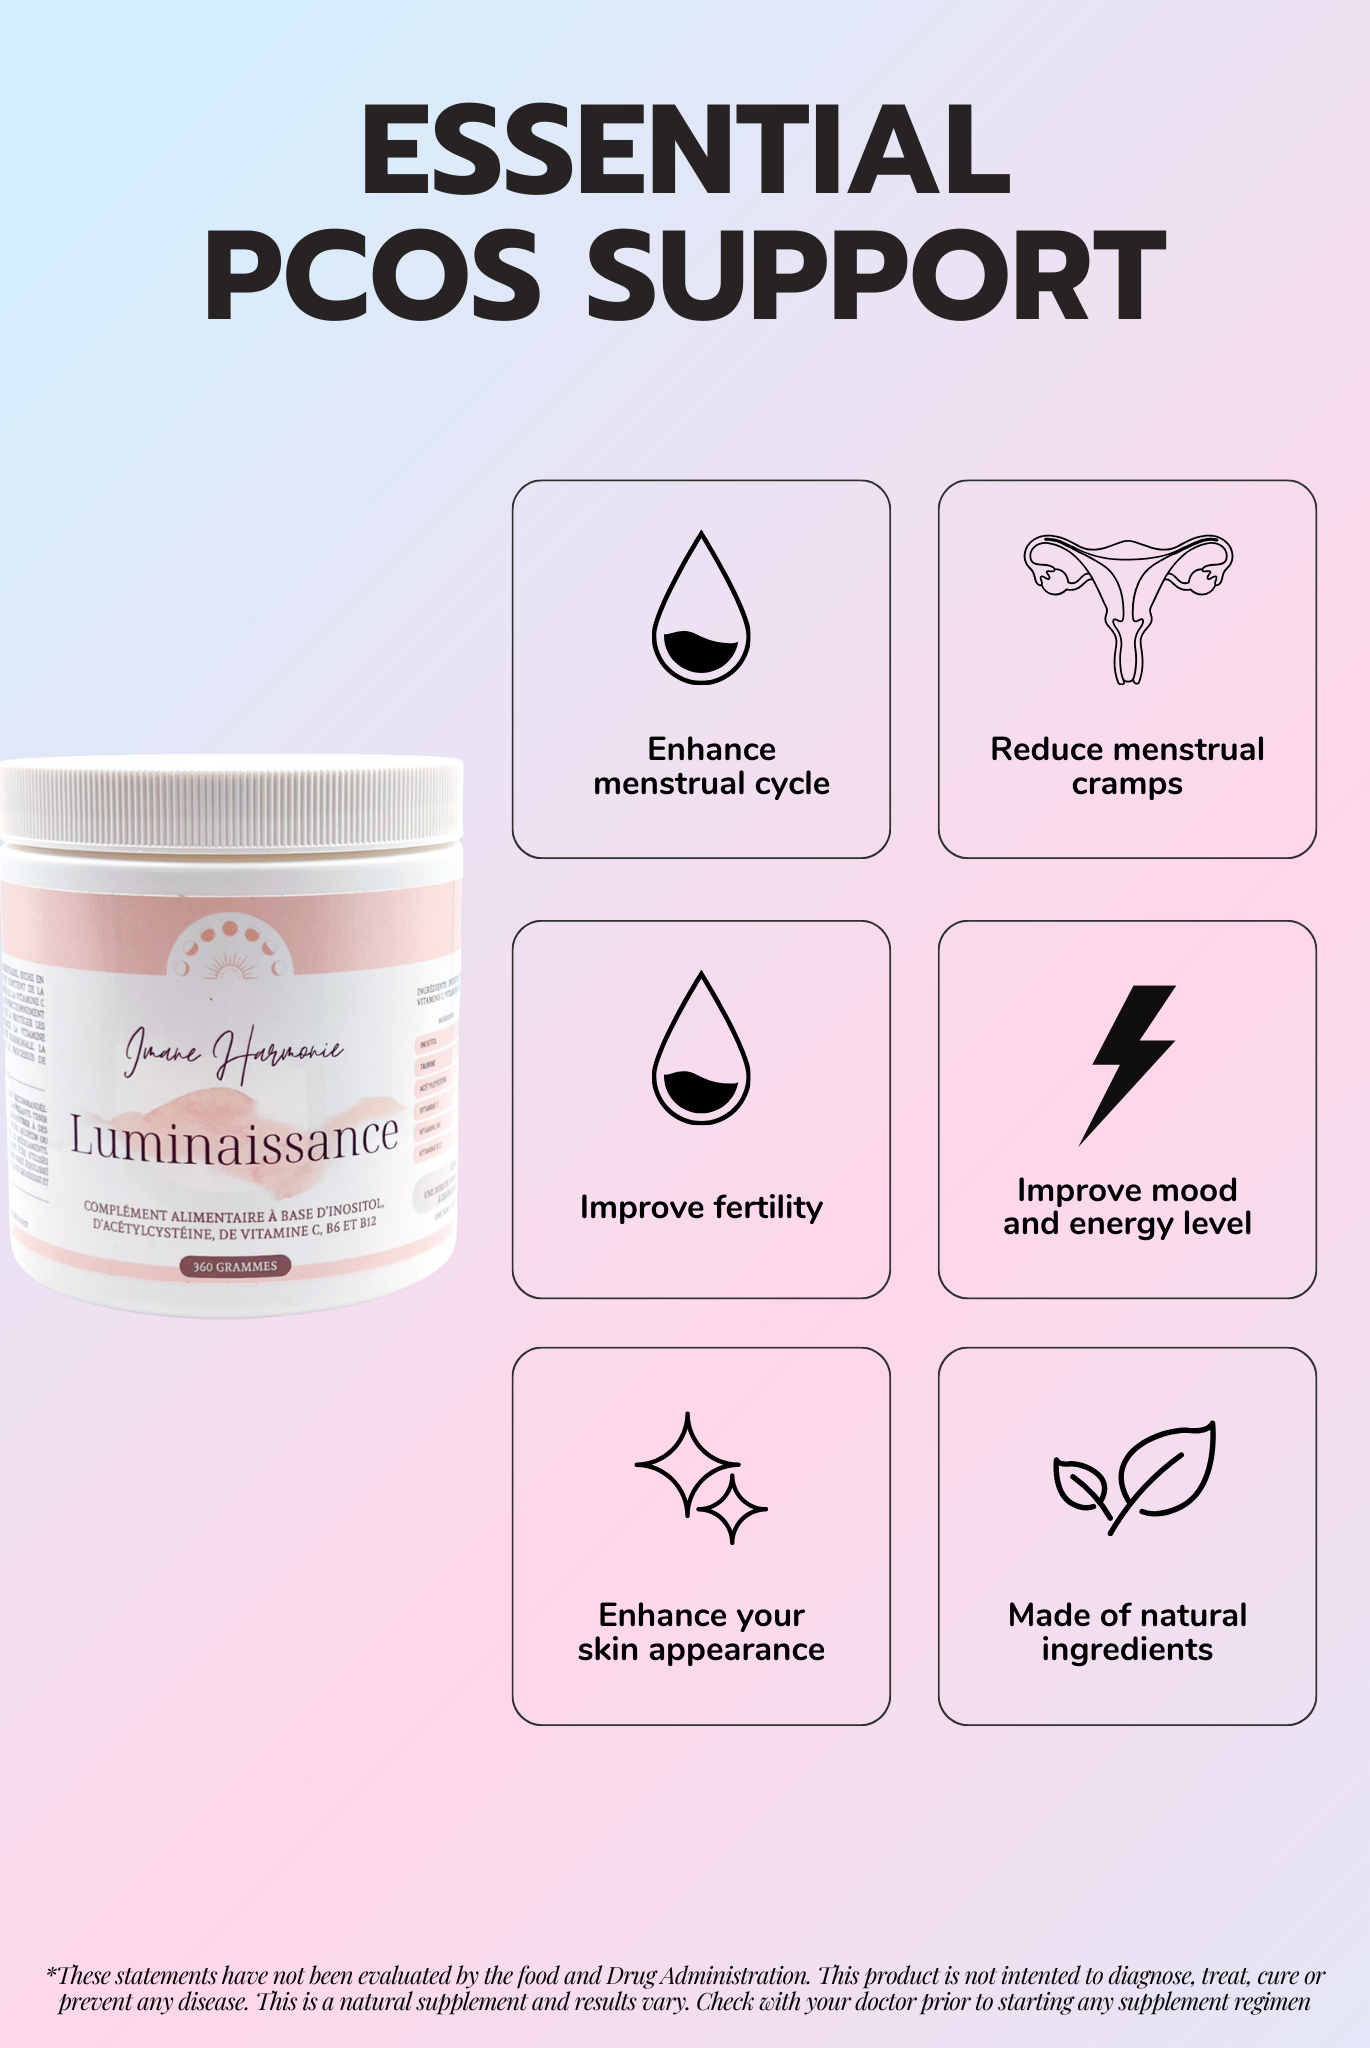 Features of Luminaissance : Enhance menstrual cycle, reduce menstrual cramps, improve fertility, improve mood and energy level, enhance your skin appearance, made of natural ingredients